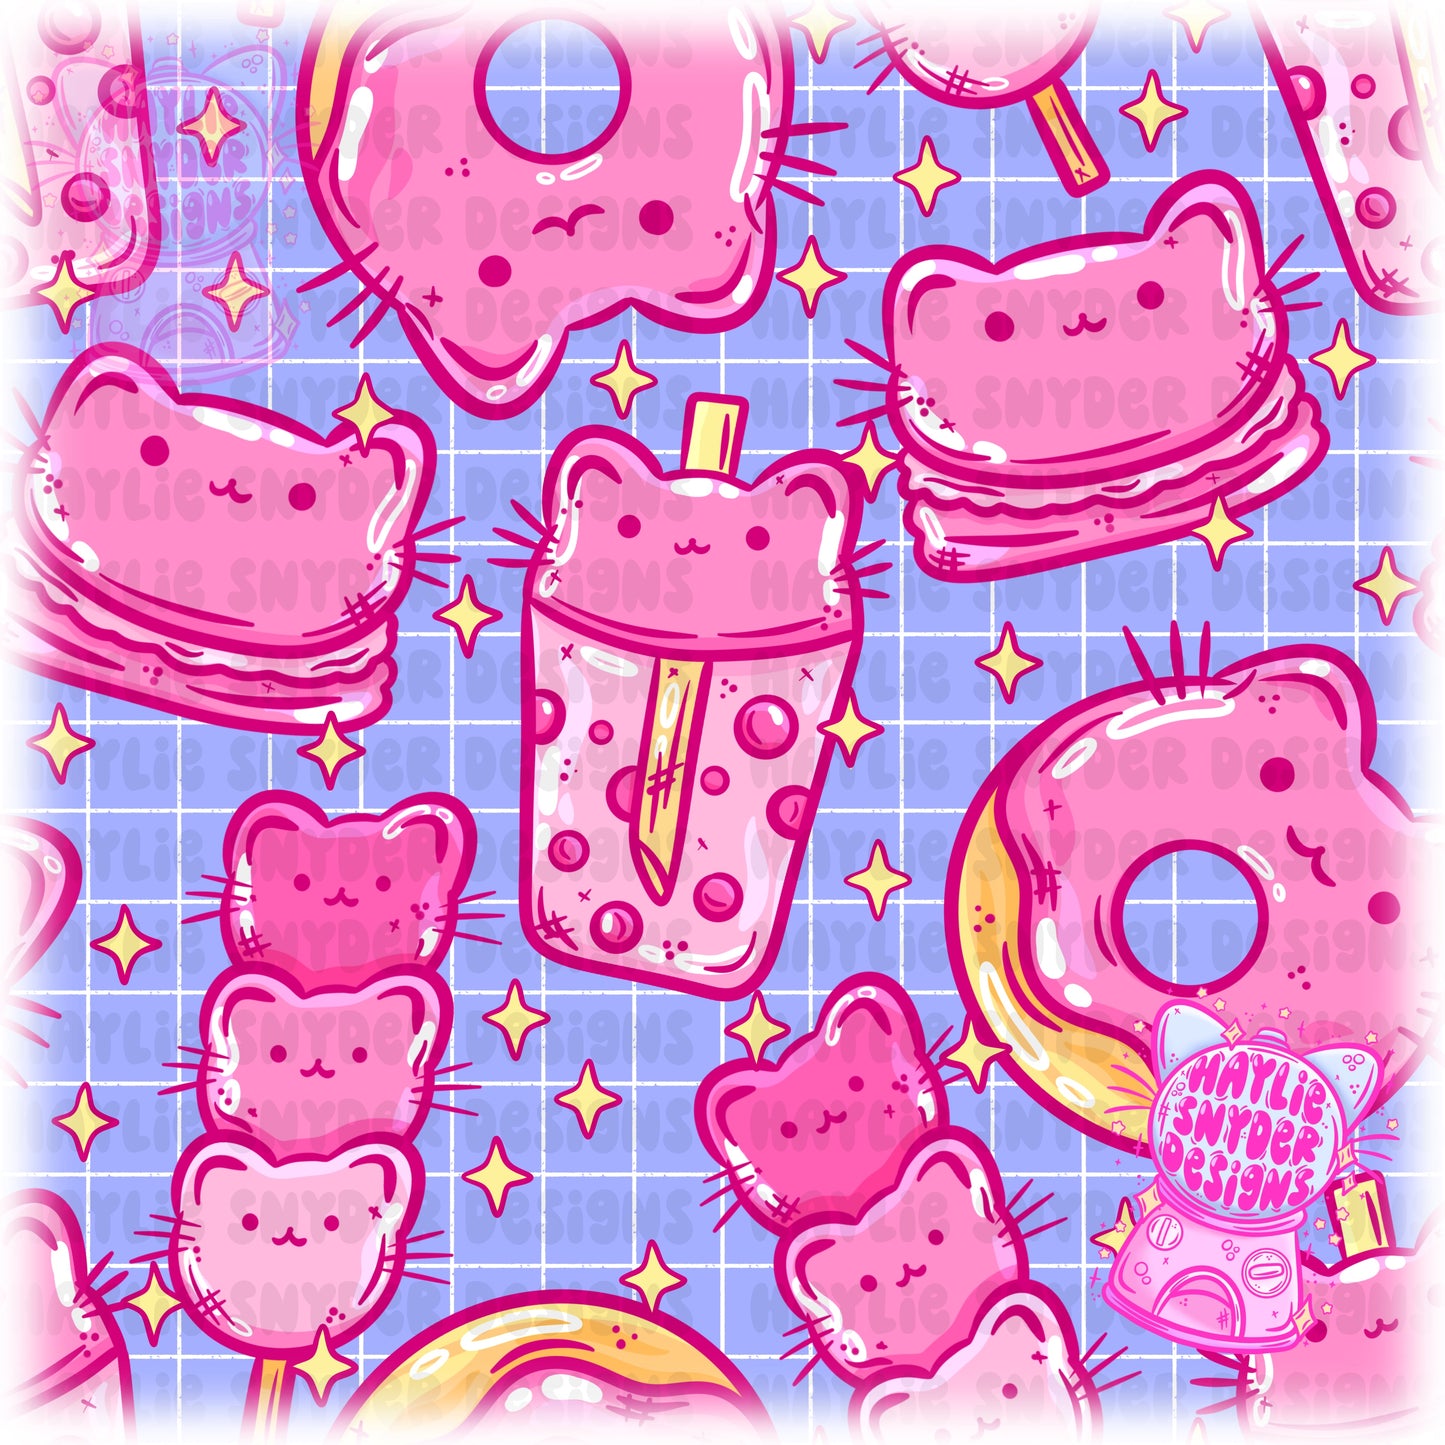 Kitty Sweets